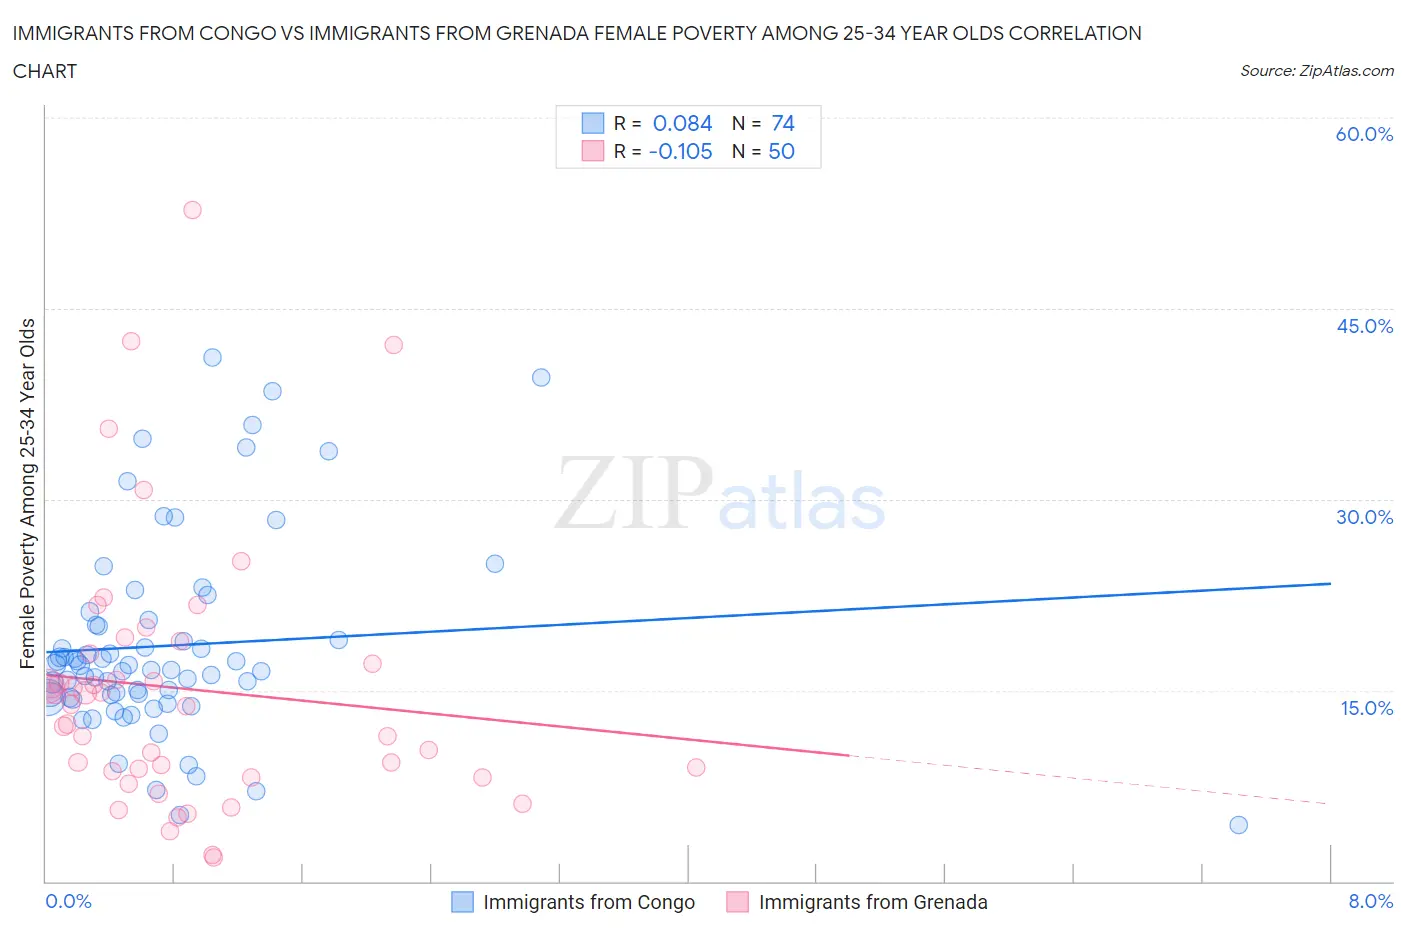 Immigrants from Congo vs Immigrants from Grenada Female Poverty Among 25-34 Year Olds